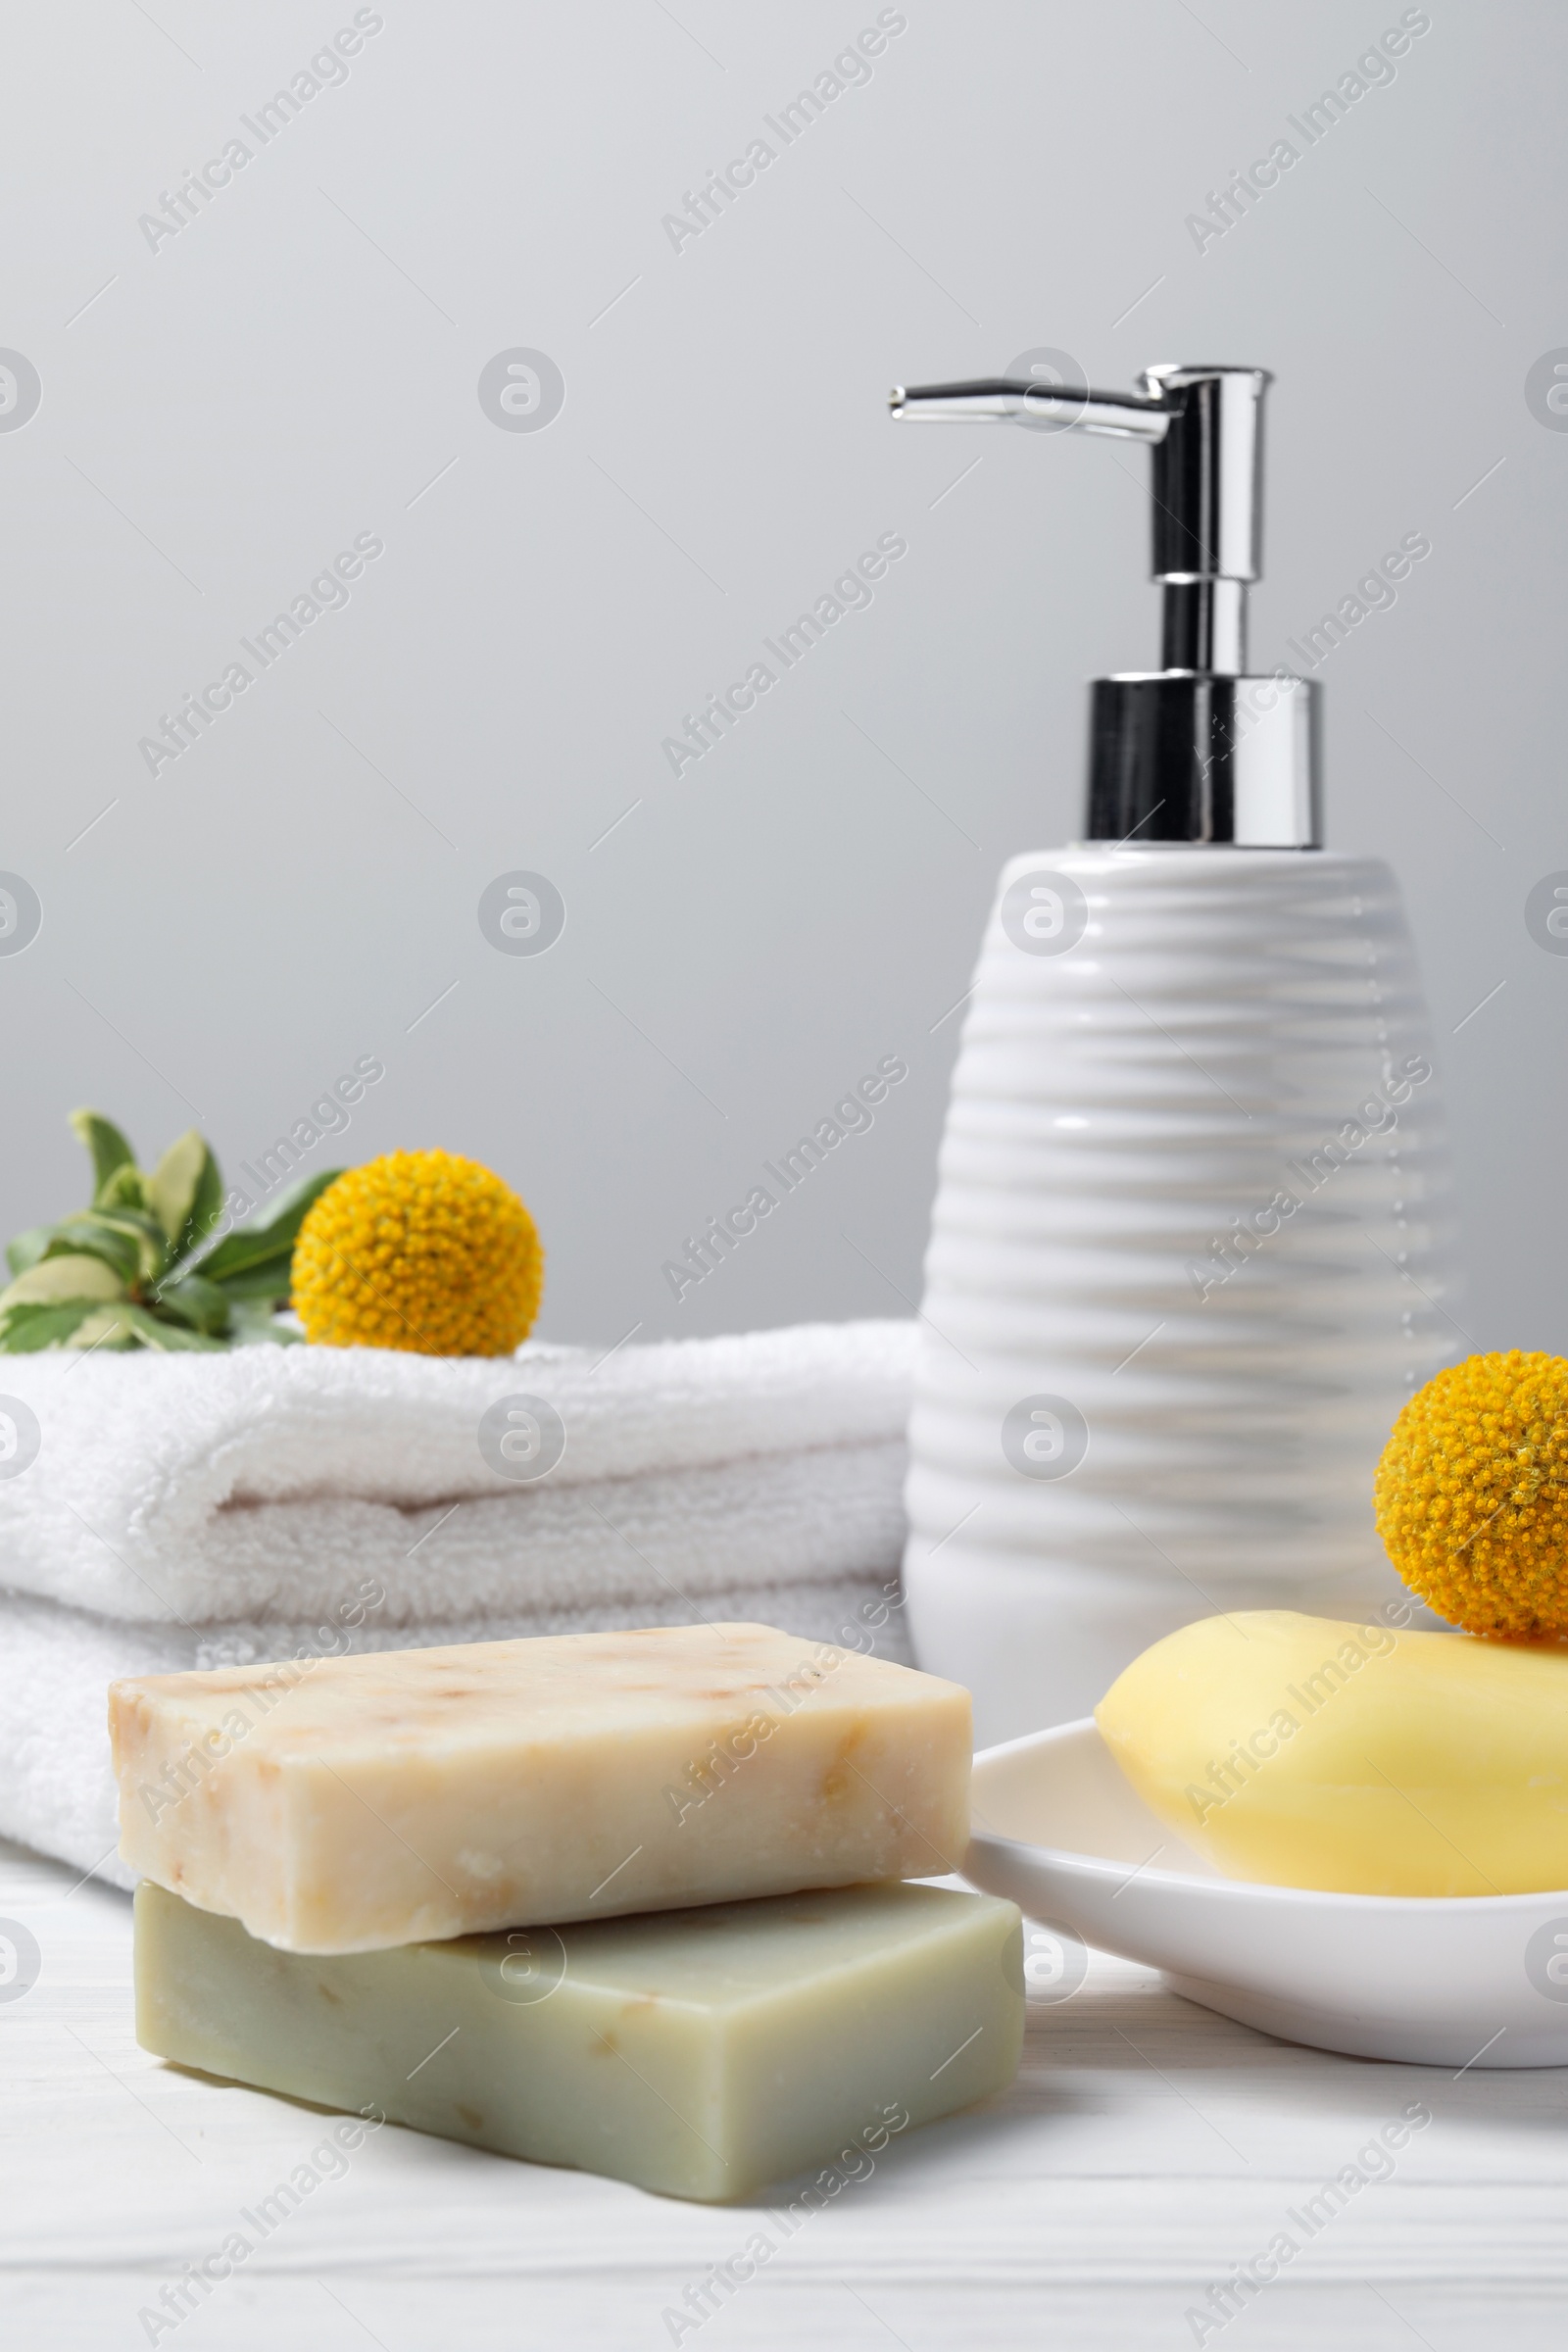 Photo of Soap bars, bottle dispenser and towels on wooden table against white background